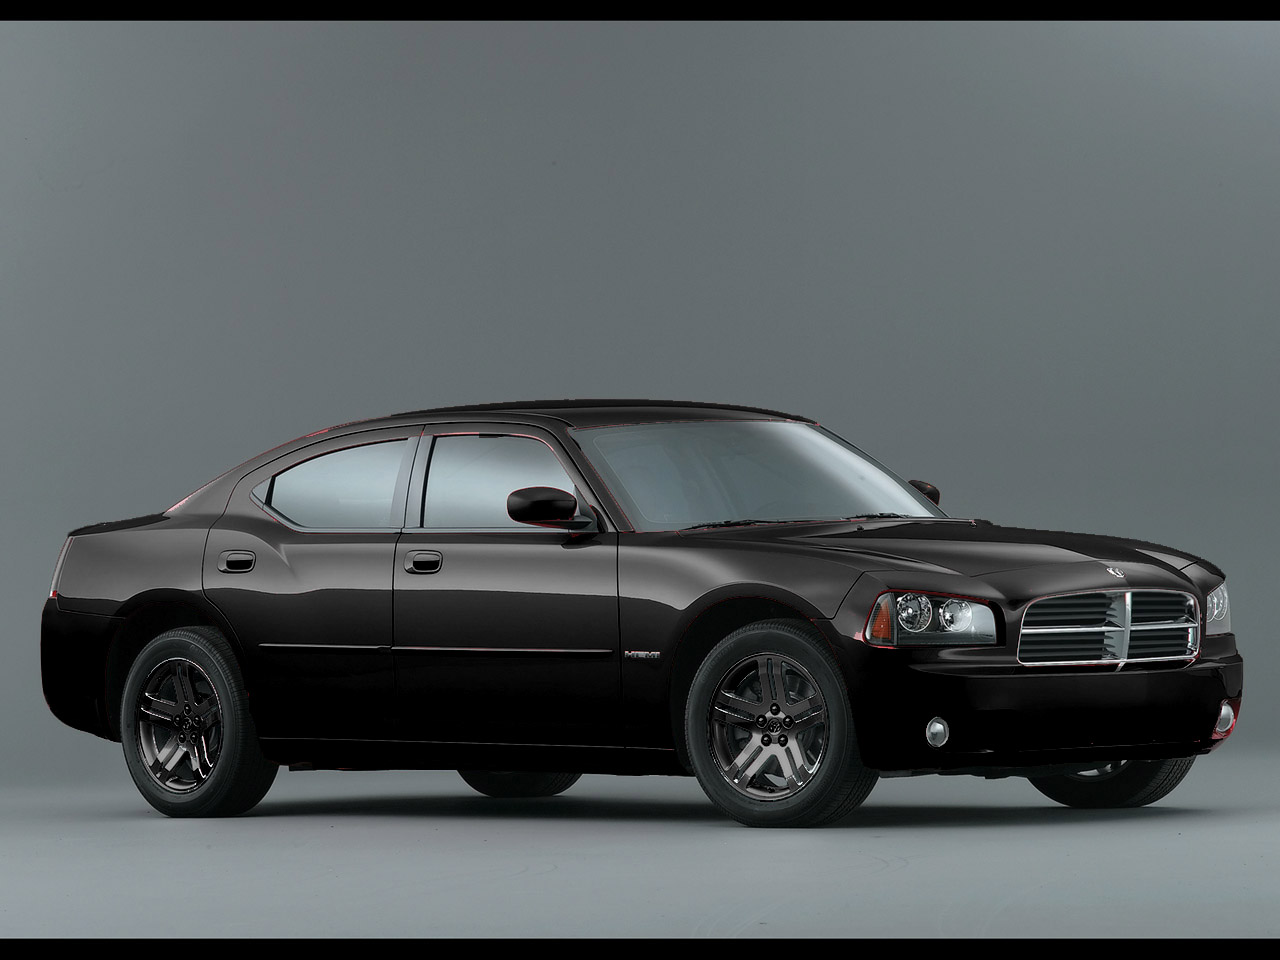 Black Dodge Charger Wallpaper HD In Cars Imageci